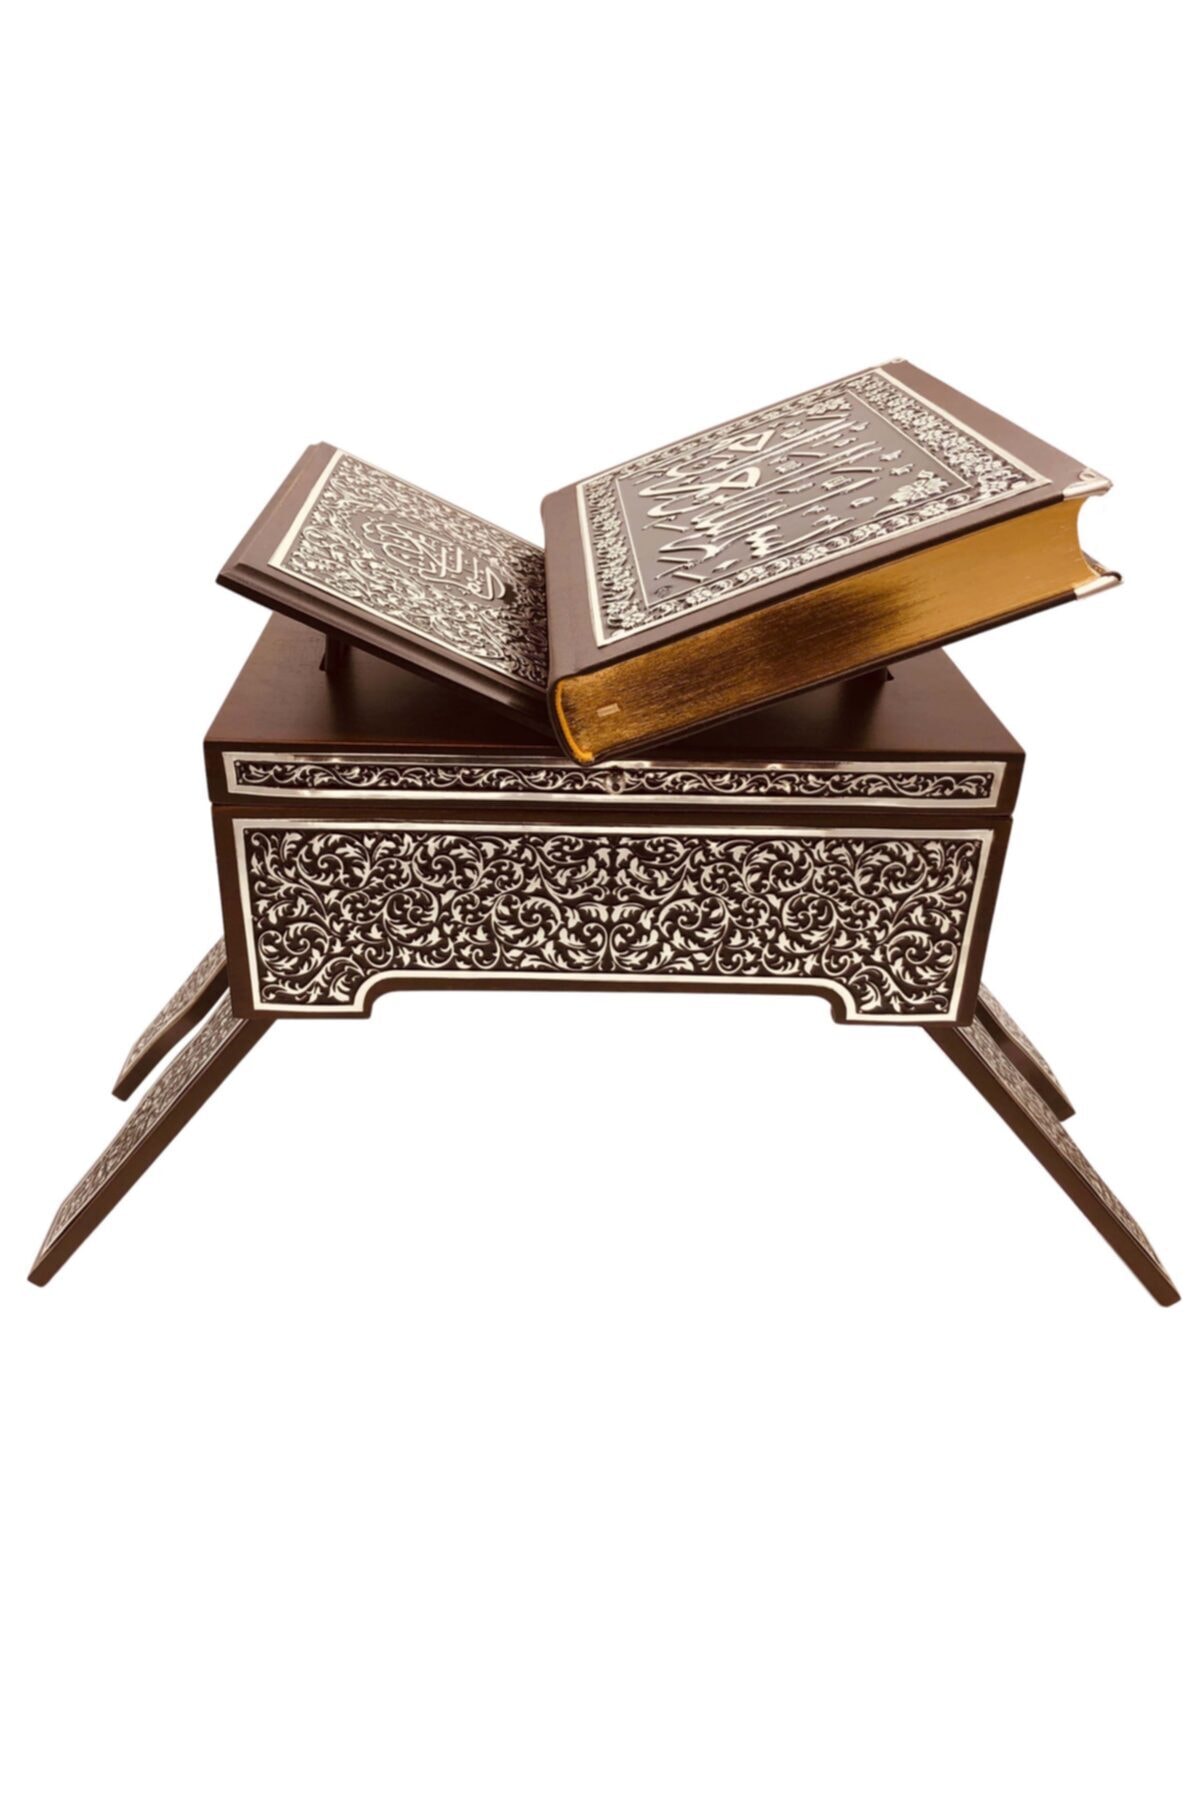 Holy Quran with Silver Coffer Rahleli Hy-218